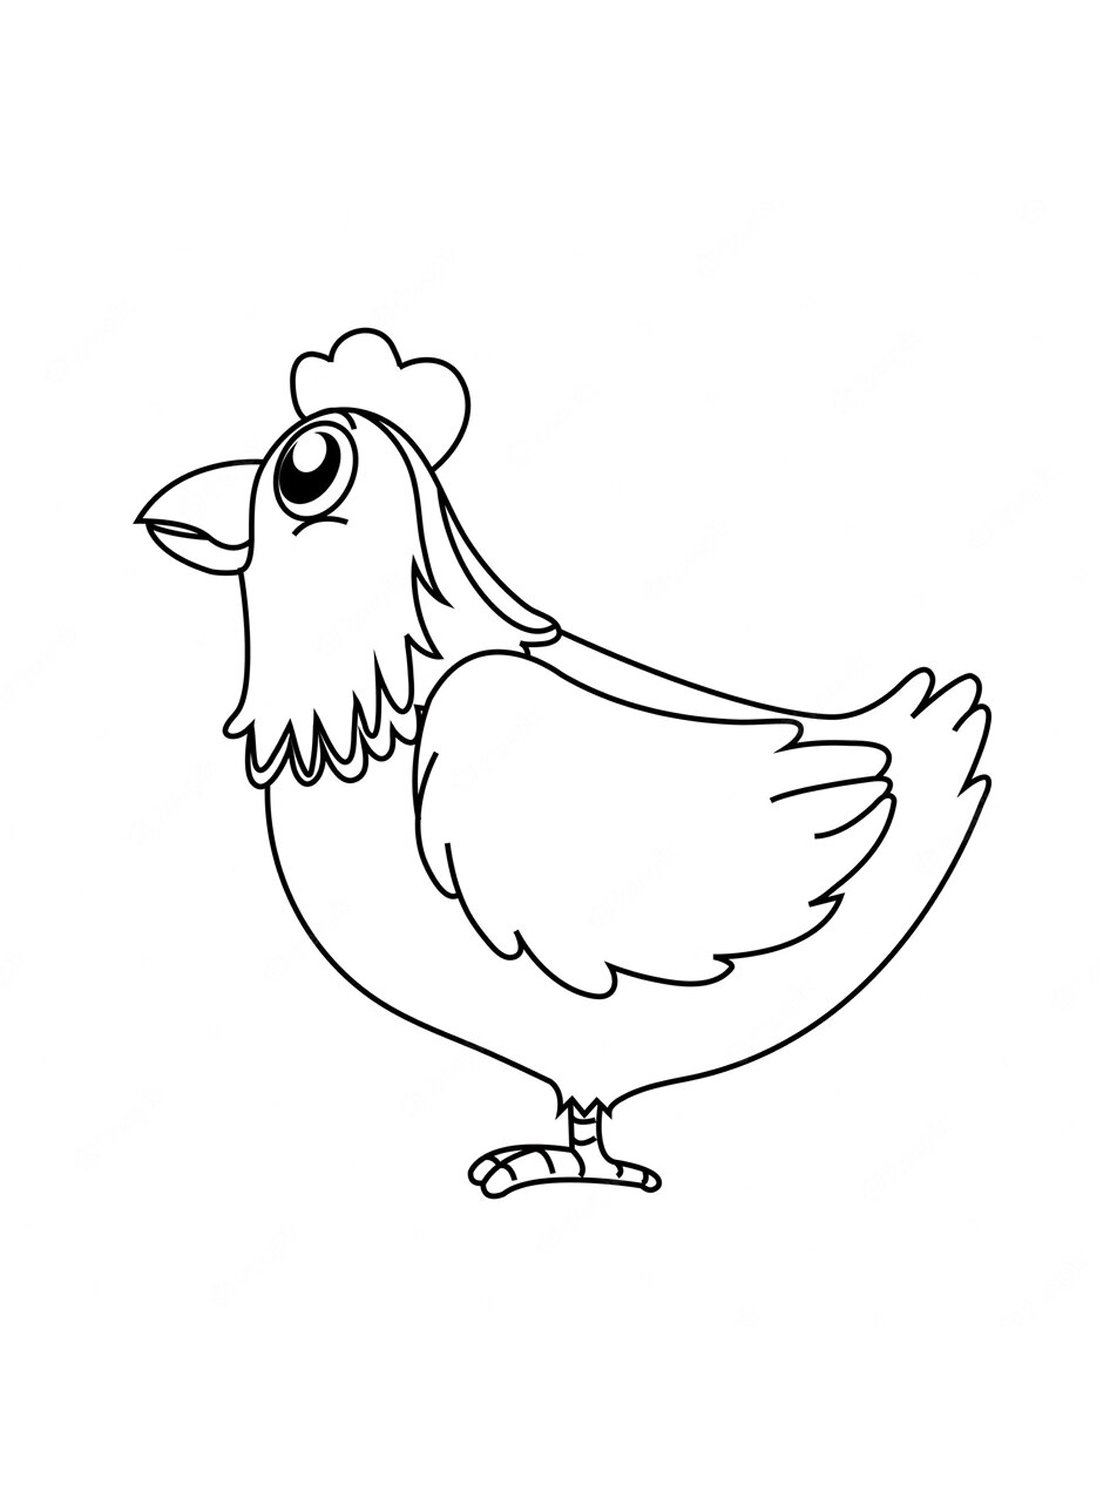 The hen Coloring Pages